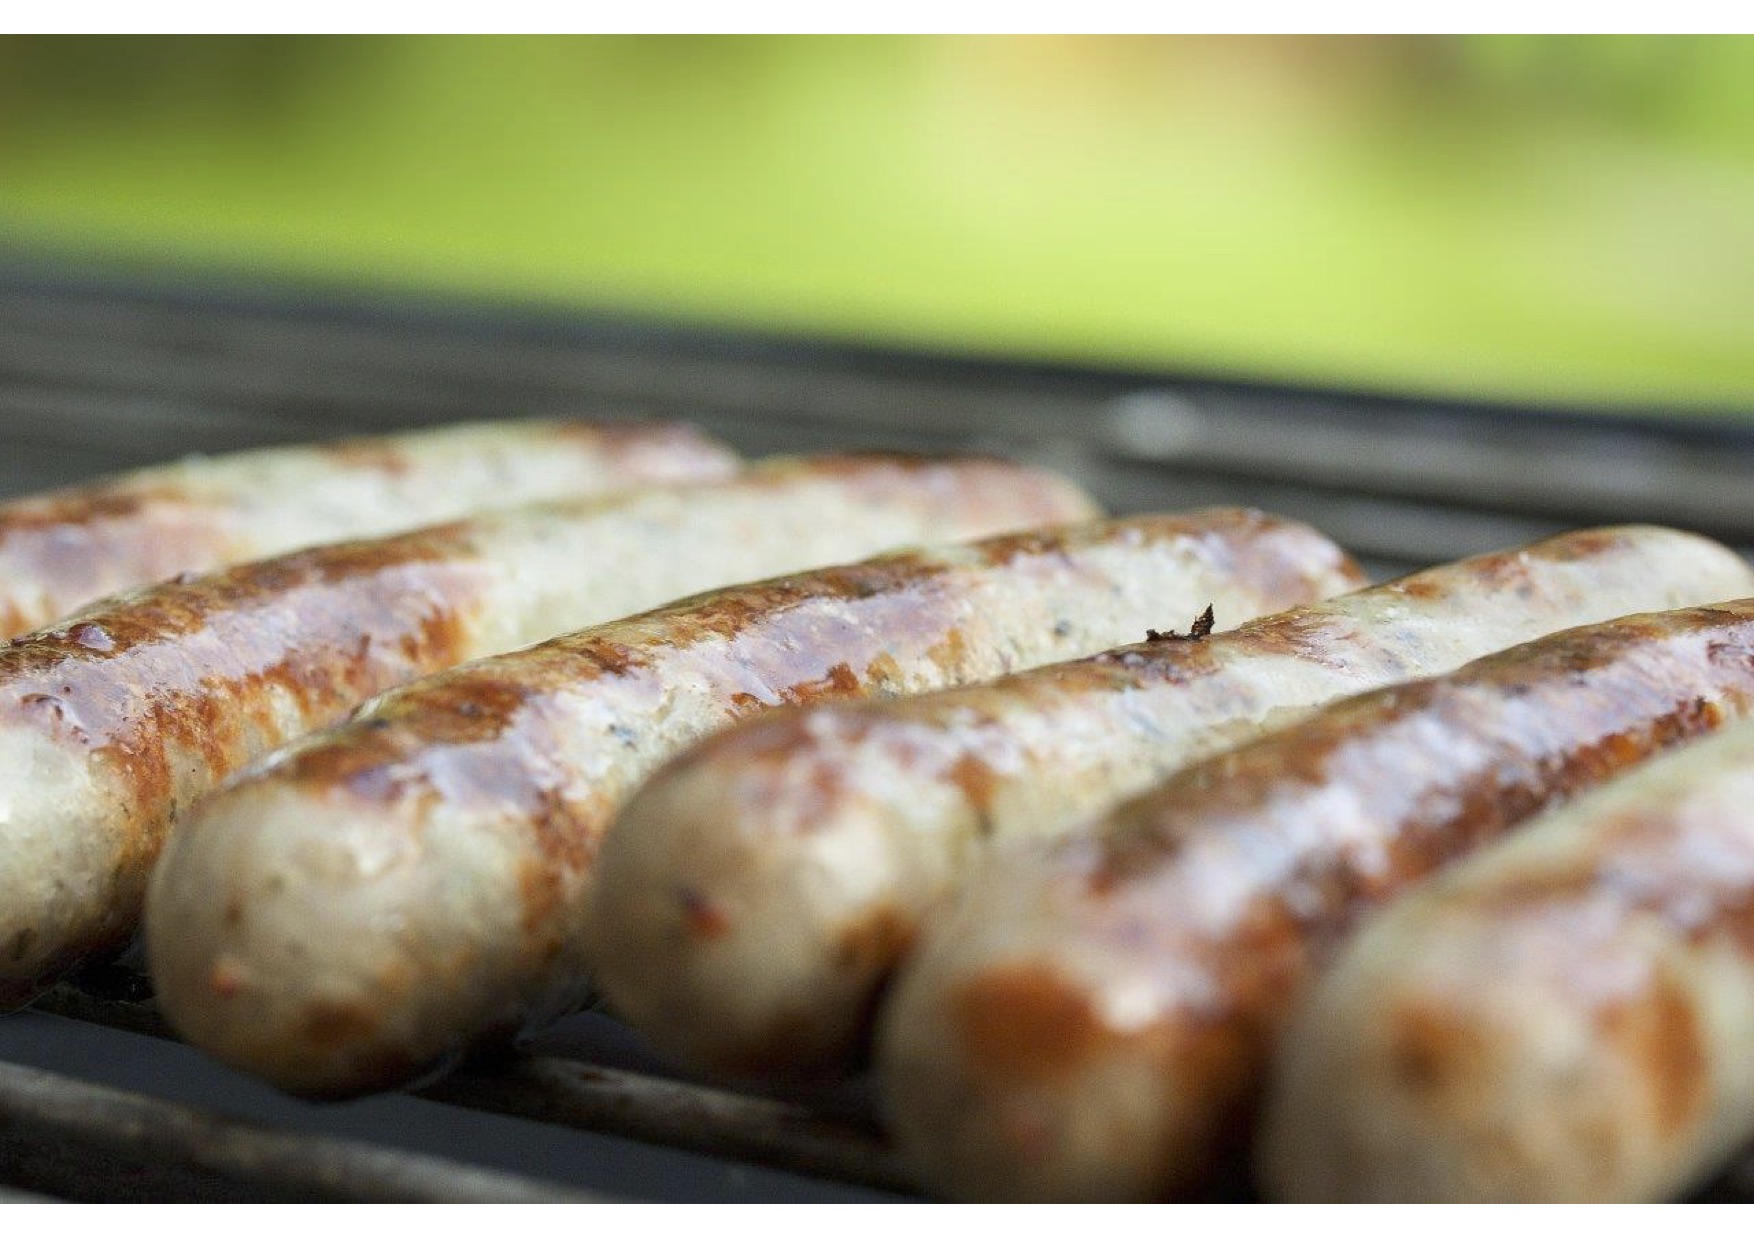 grill-sausages-364578_1920.jpg